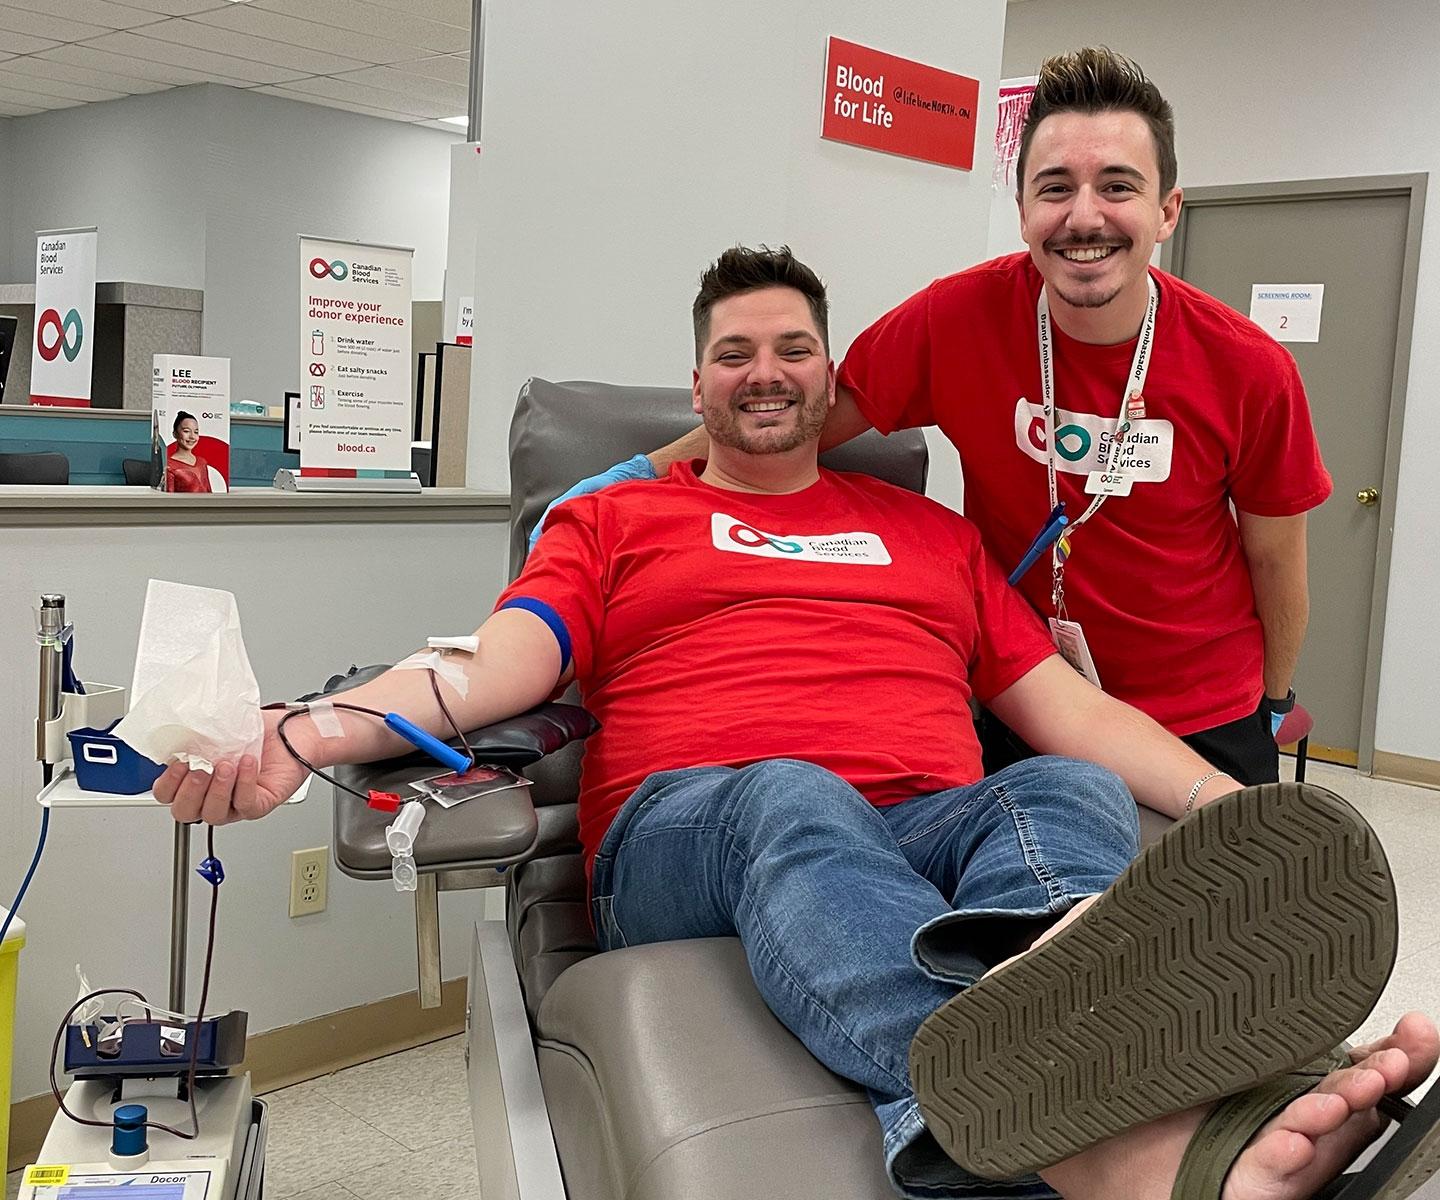 Man donating blood with partner smiling at his side